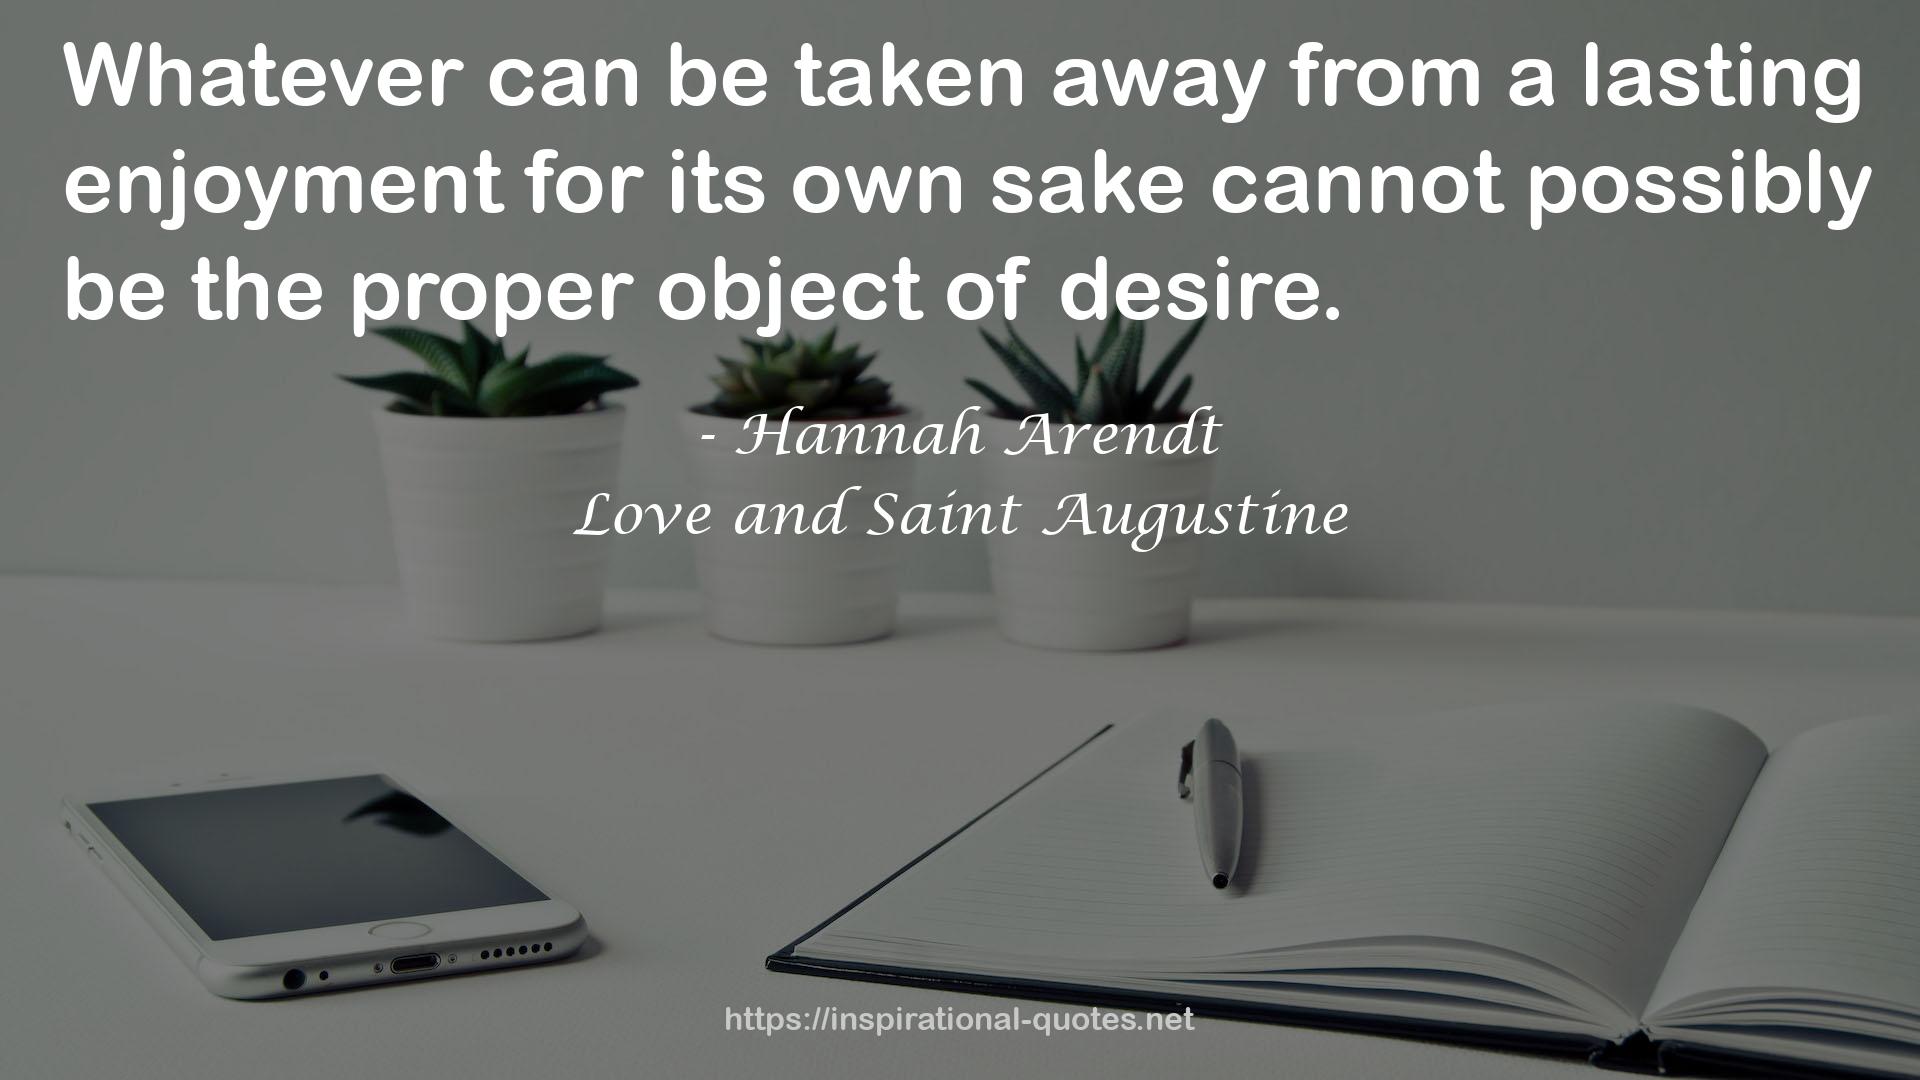 Love and Saint Augustine QUOTES